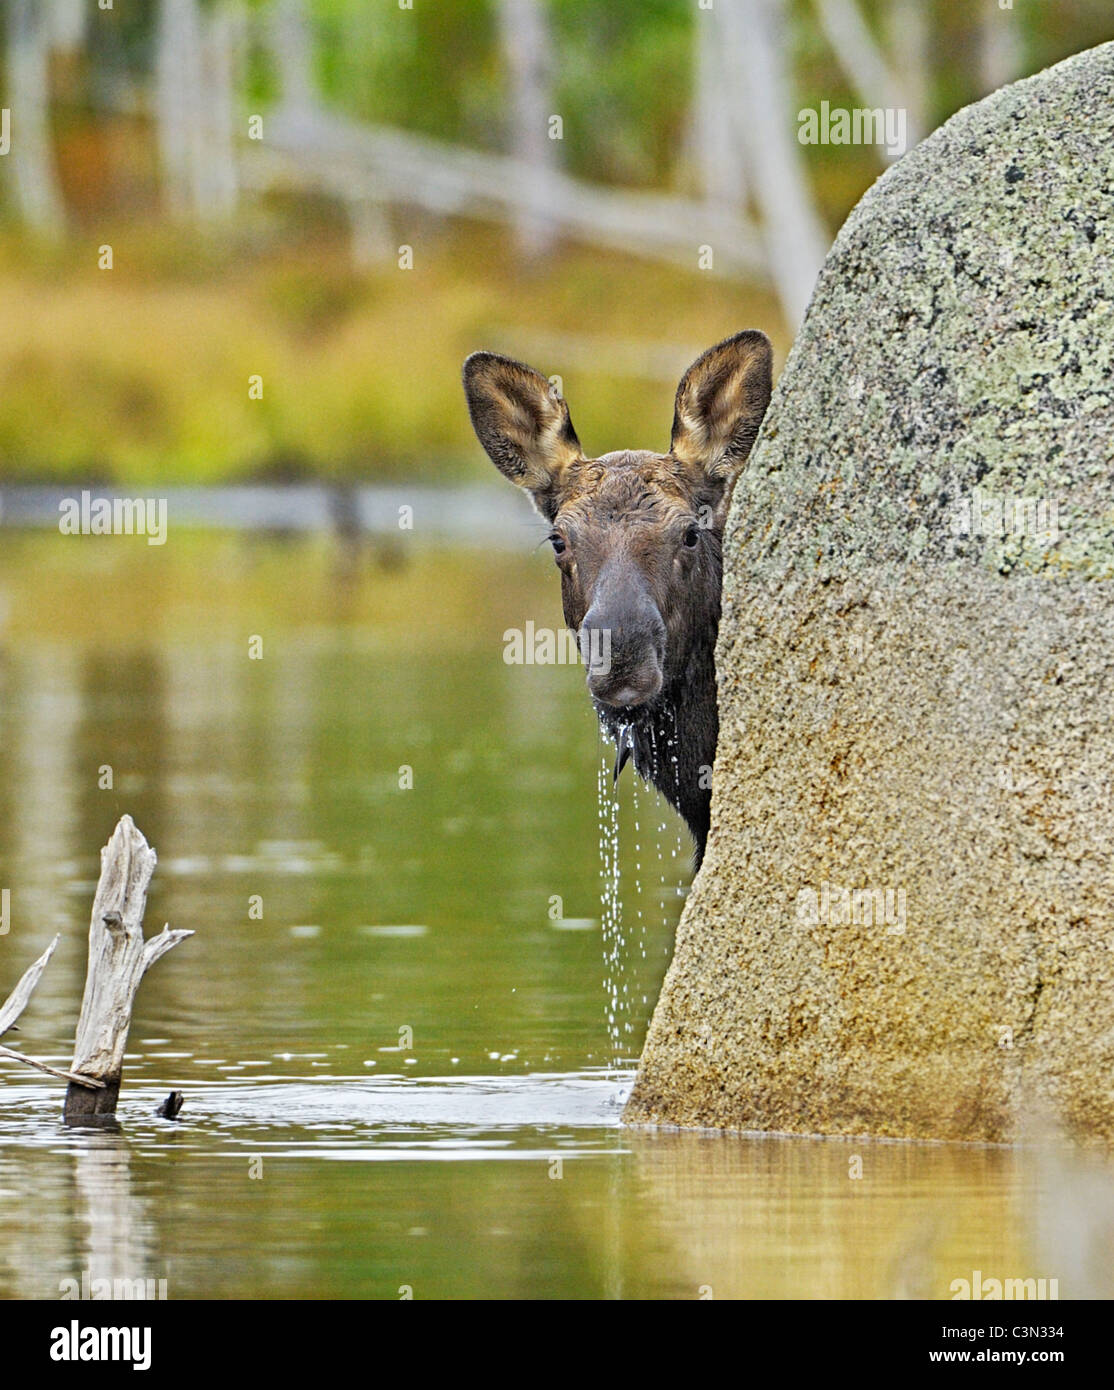 Curious baby moose Stock Photo